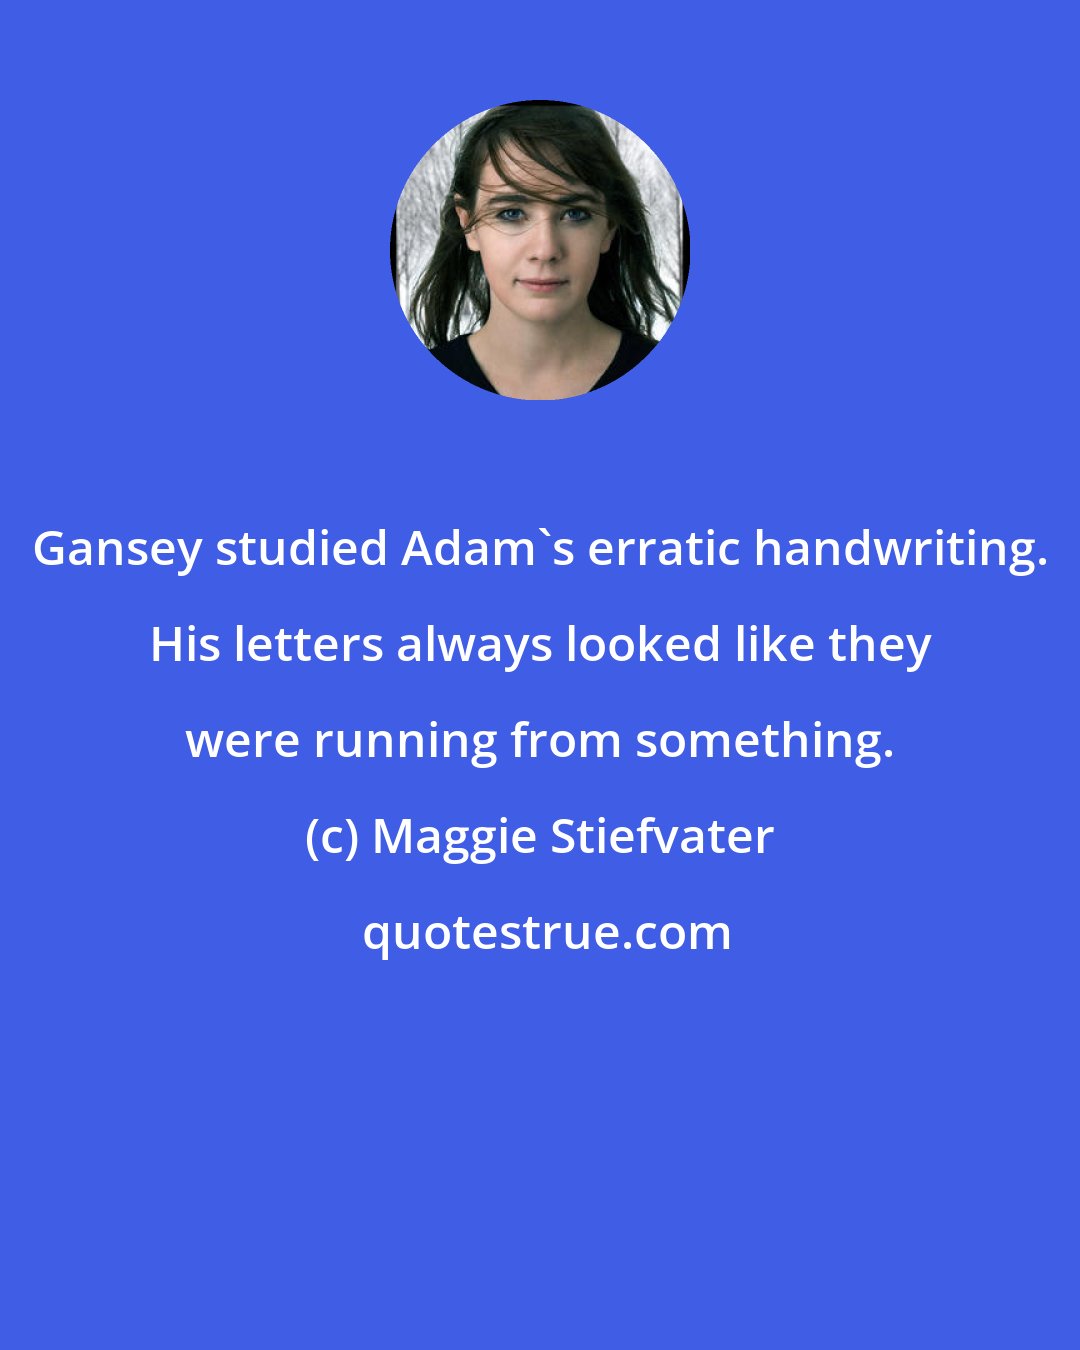 Maggie Stiefvater: Gansey studied Adam's erratic handwriting. His letters always looked like they were running from something.